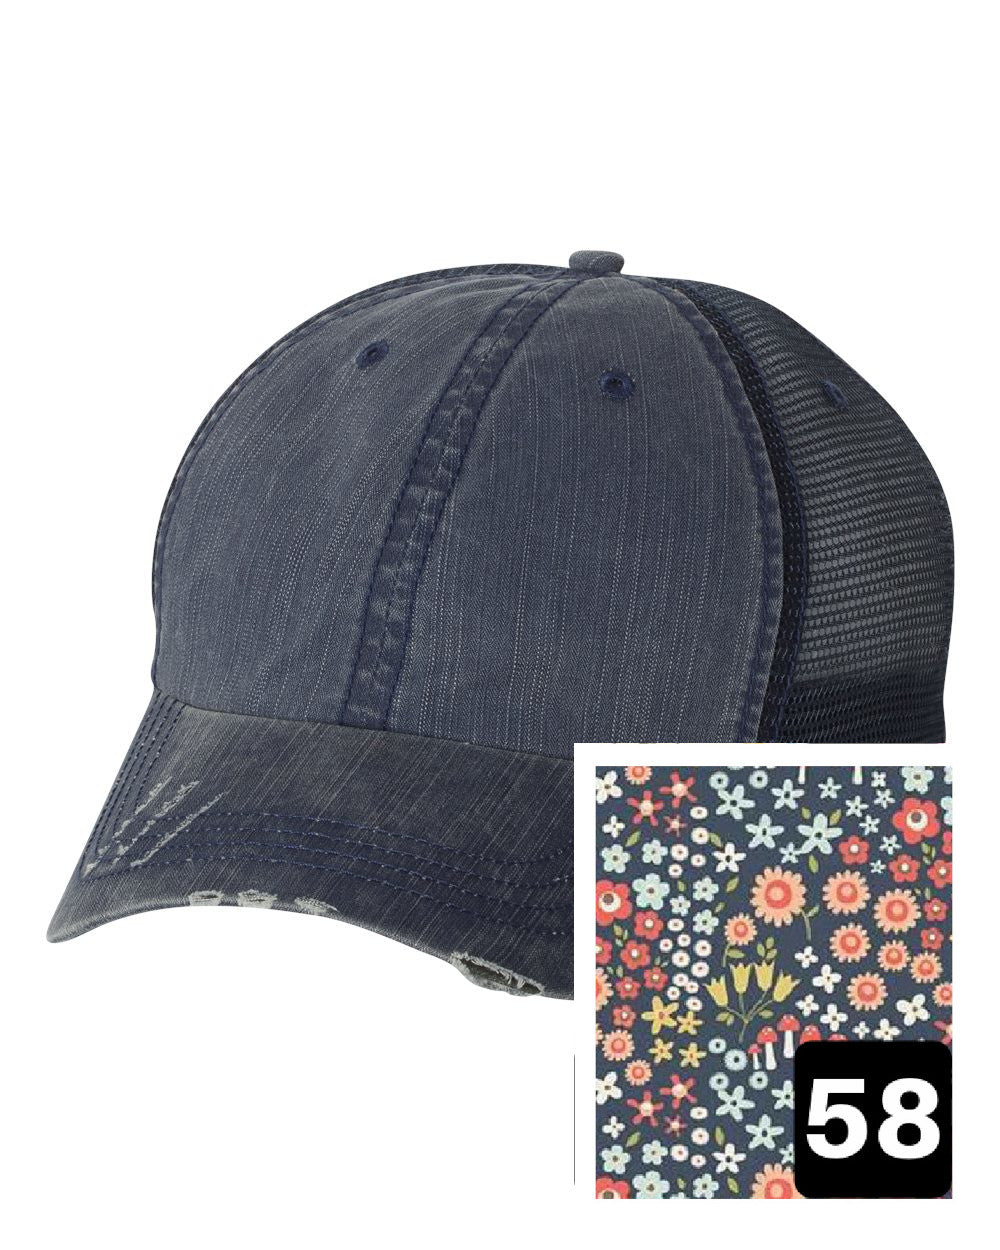 Florida Hat | Navy Distressed Trucker Cap | Many Fabric Choices